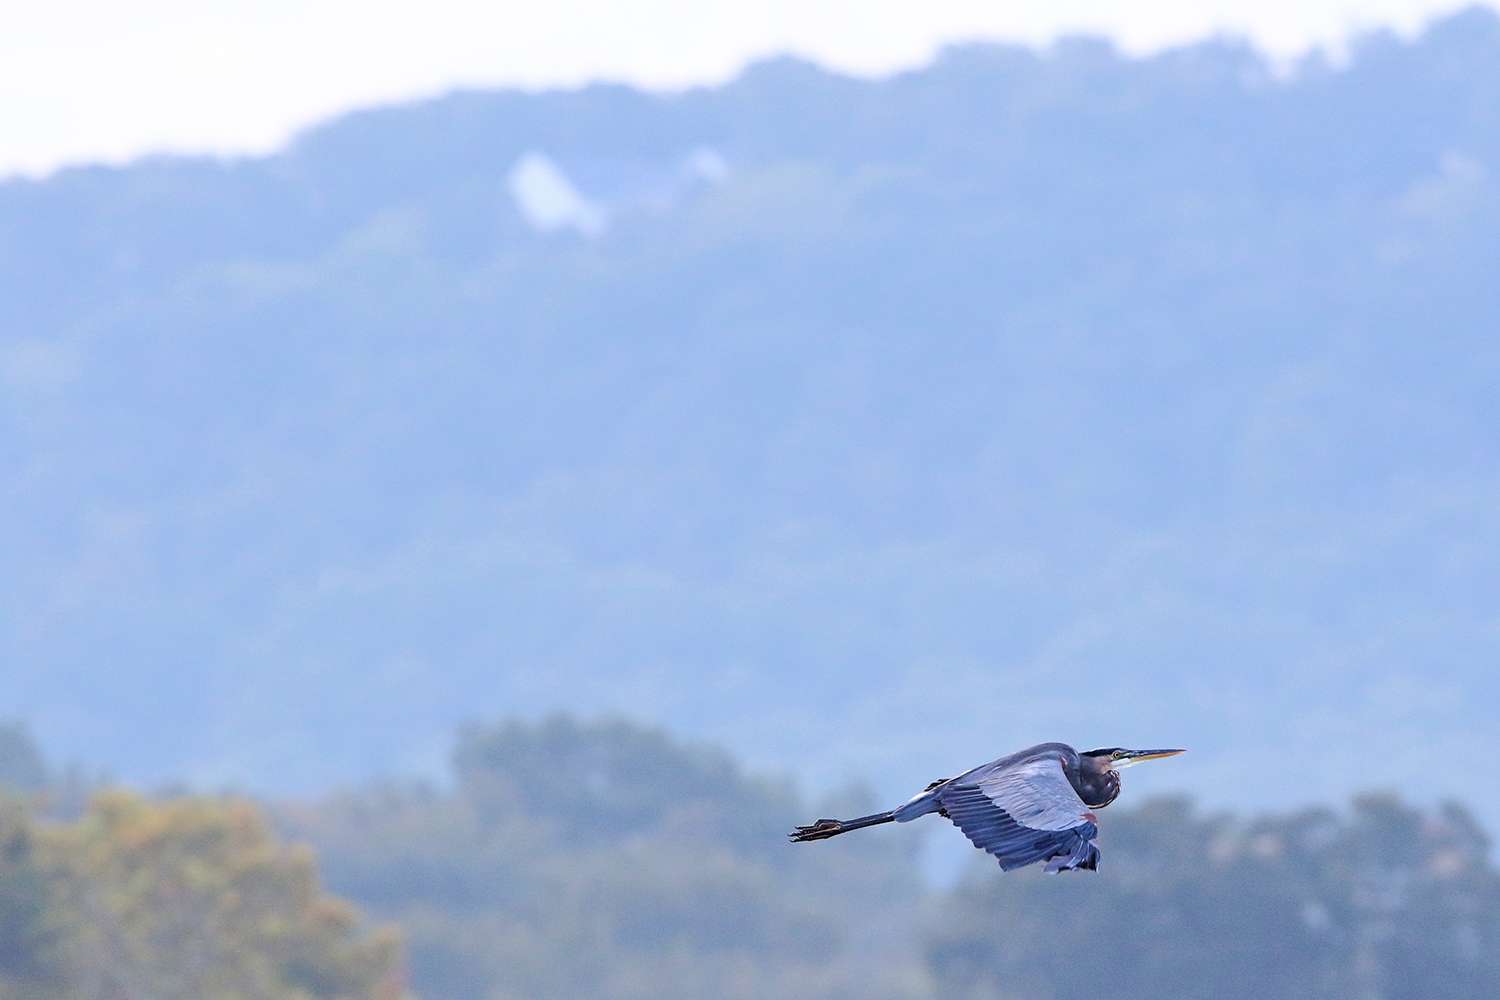 Great blue heron at Lake Tenkiller 2019. This was a rescheduled event that was originally supposed to occur on Ft. Gibson, but high waters forced the Elites to another nearby Oklahoma lake. 